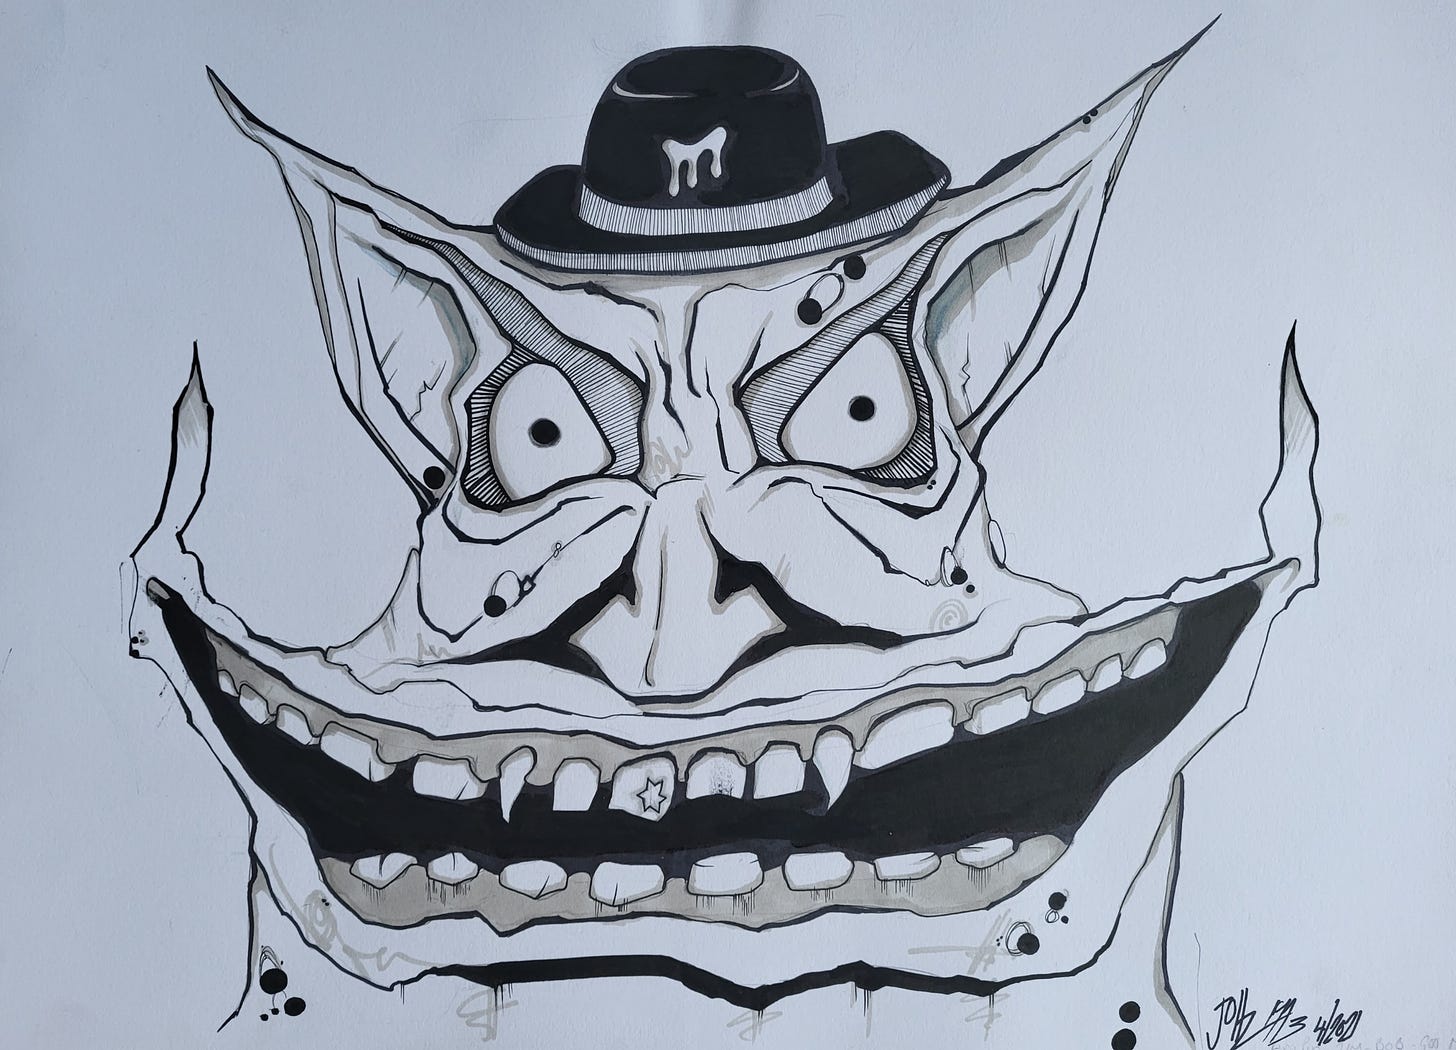 Drawing: a person with a grotesquely wide smile, many teeth and pointy ears, wearing a hat with a gloppy symbol on it